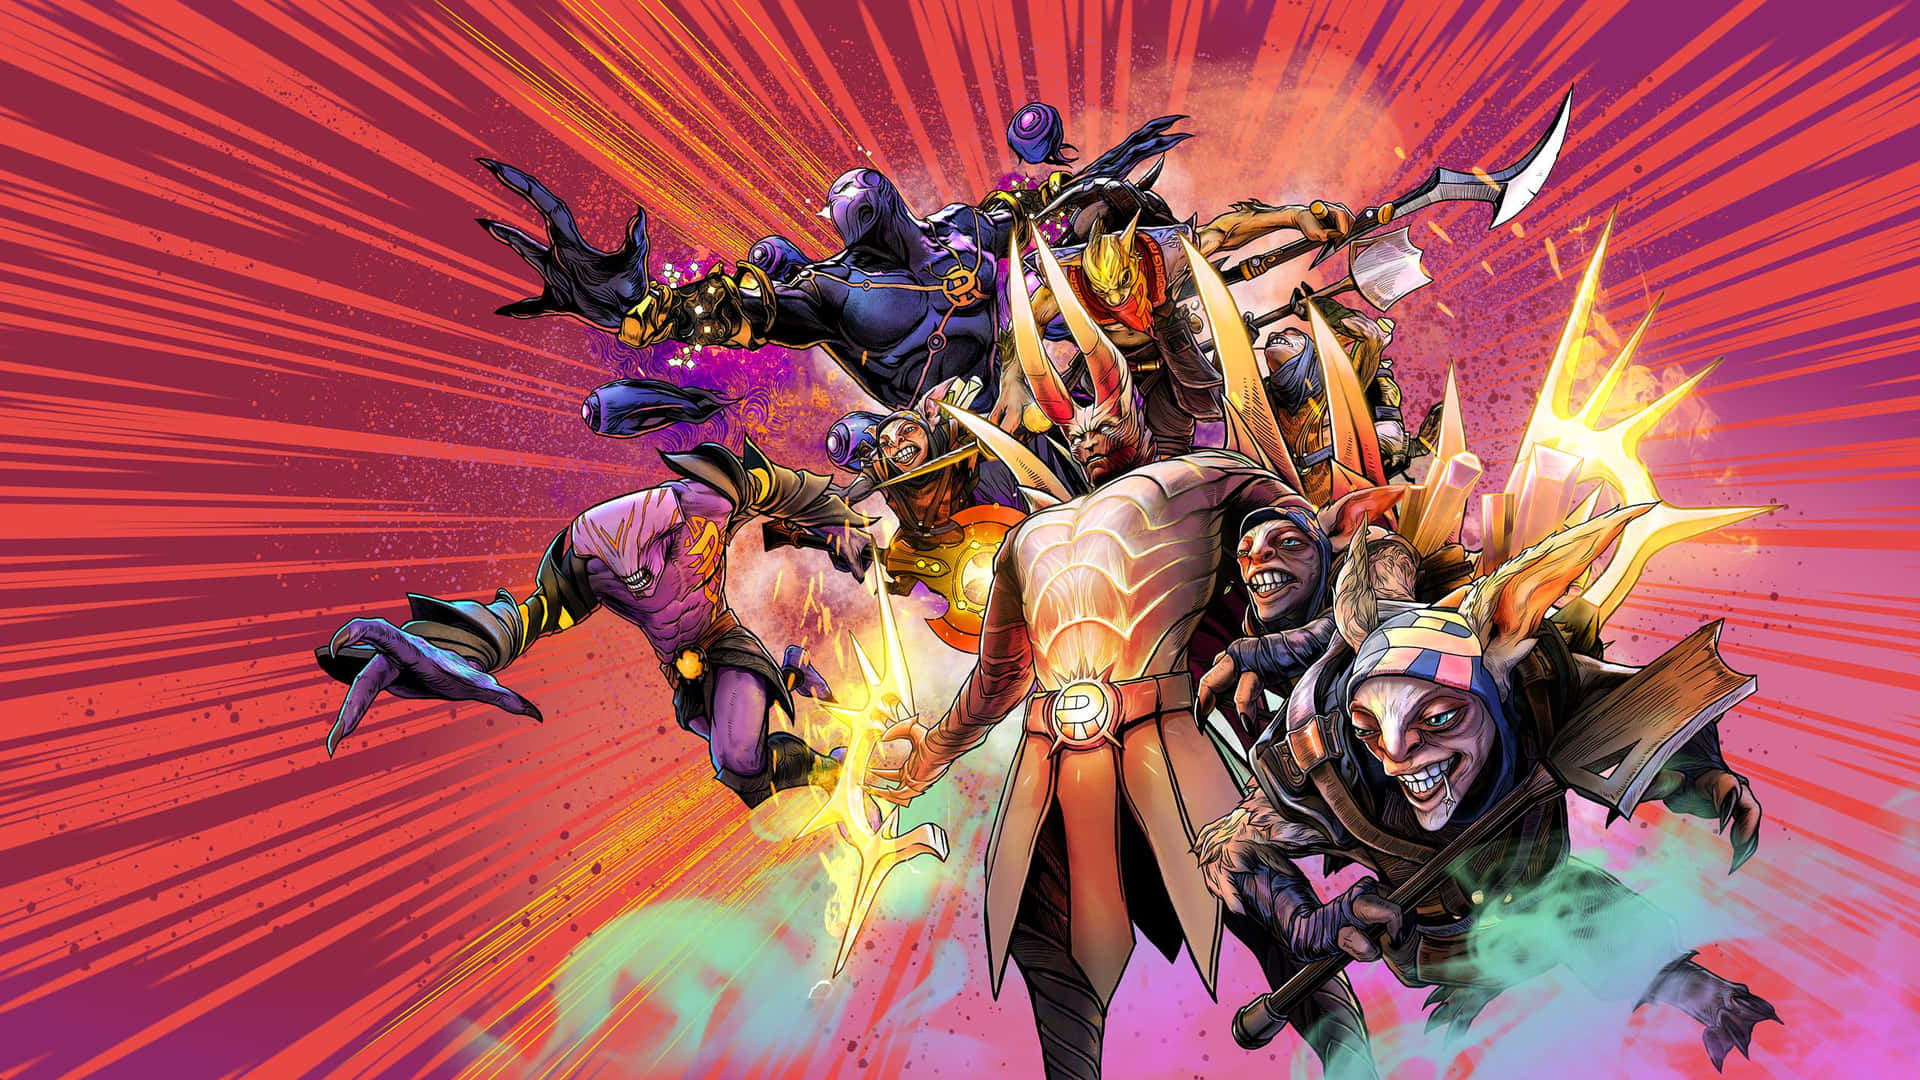 Action-packed Dota 2 Battle Scene featuring characters in vibrant colors